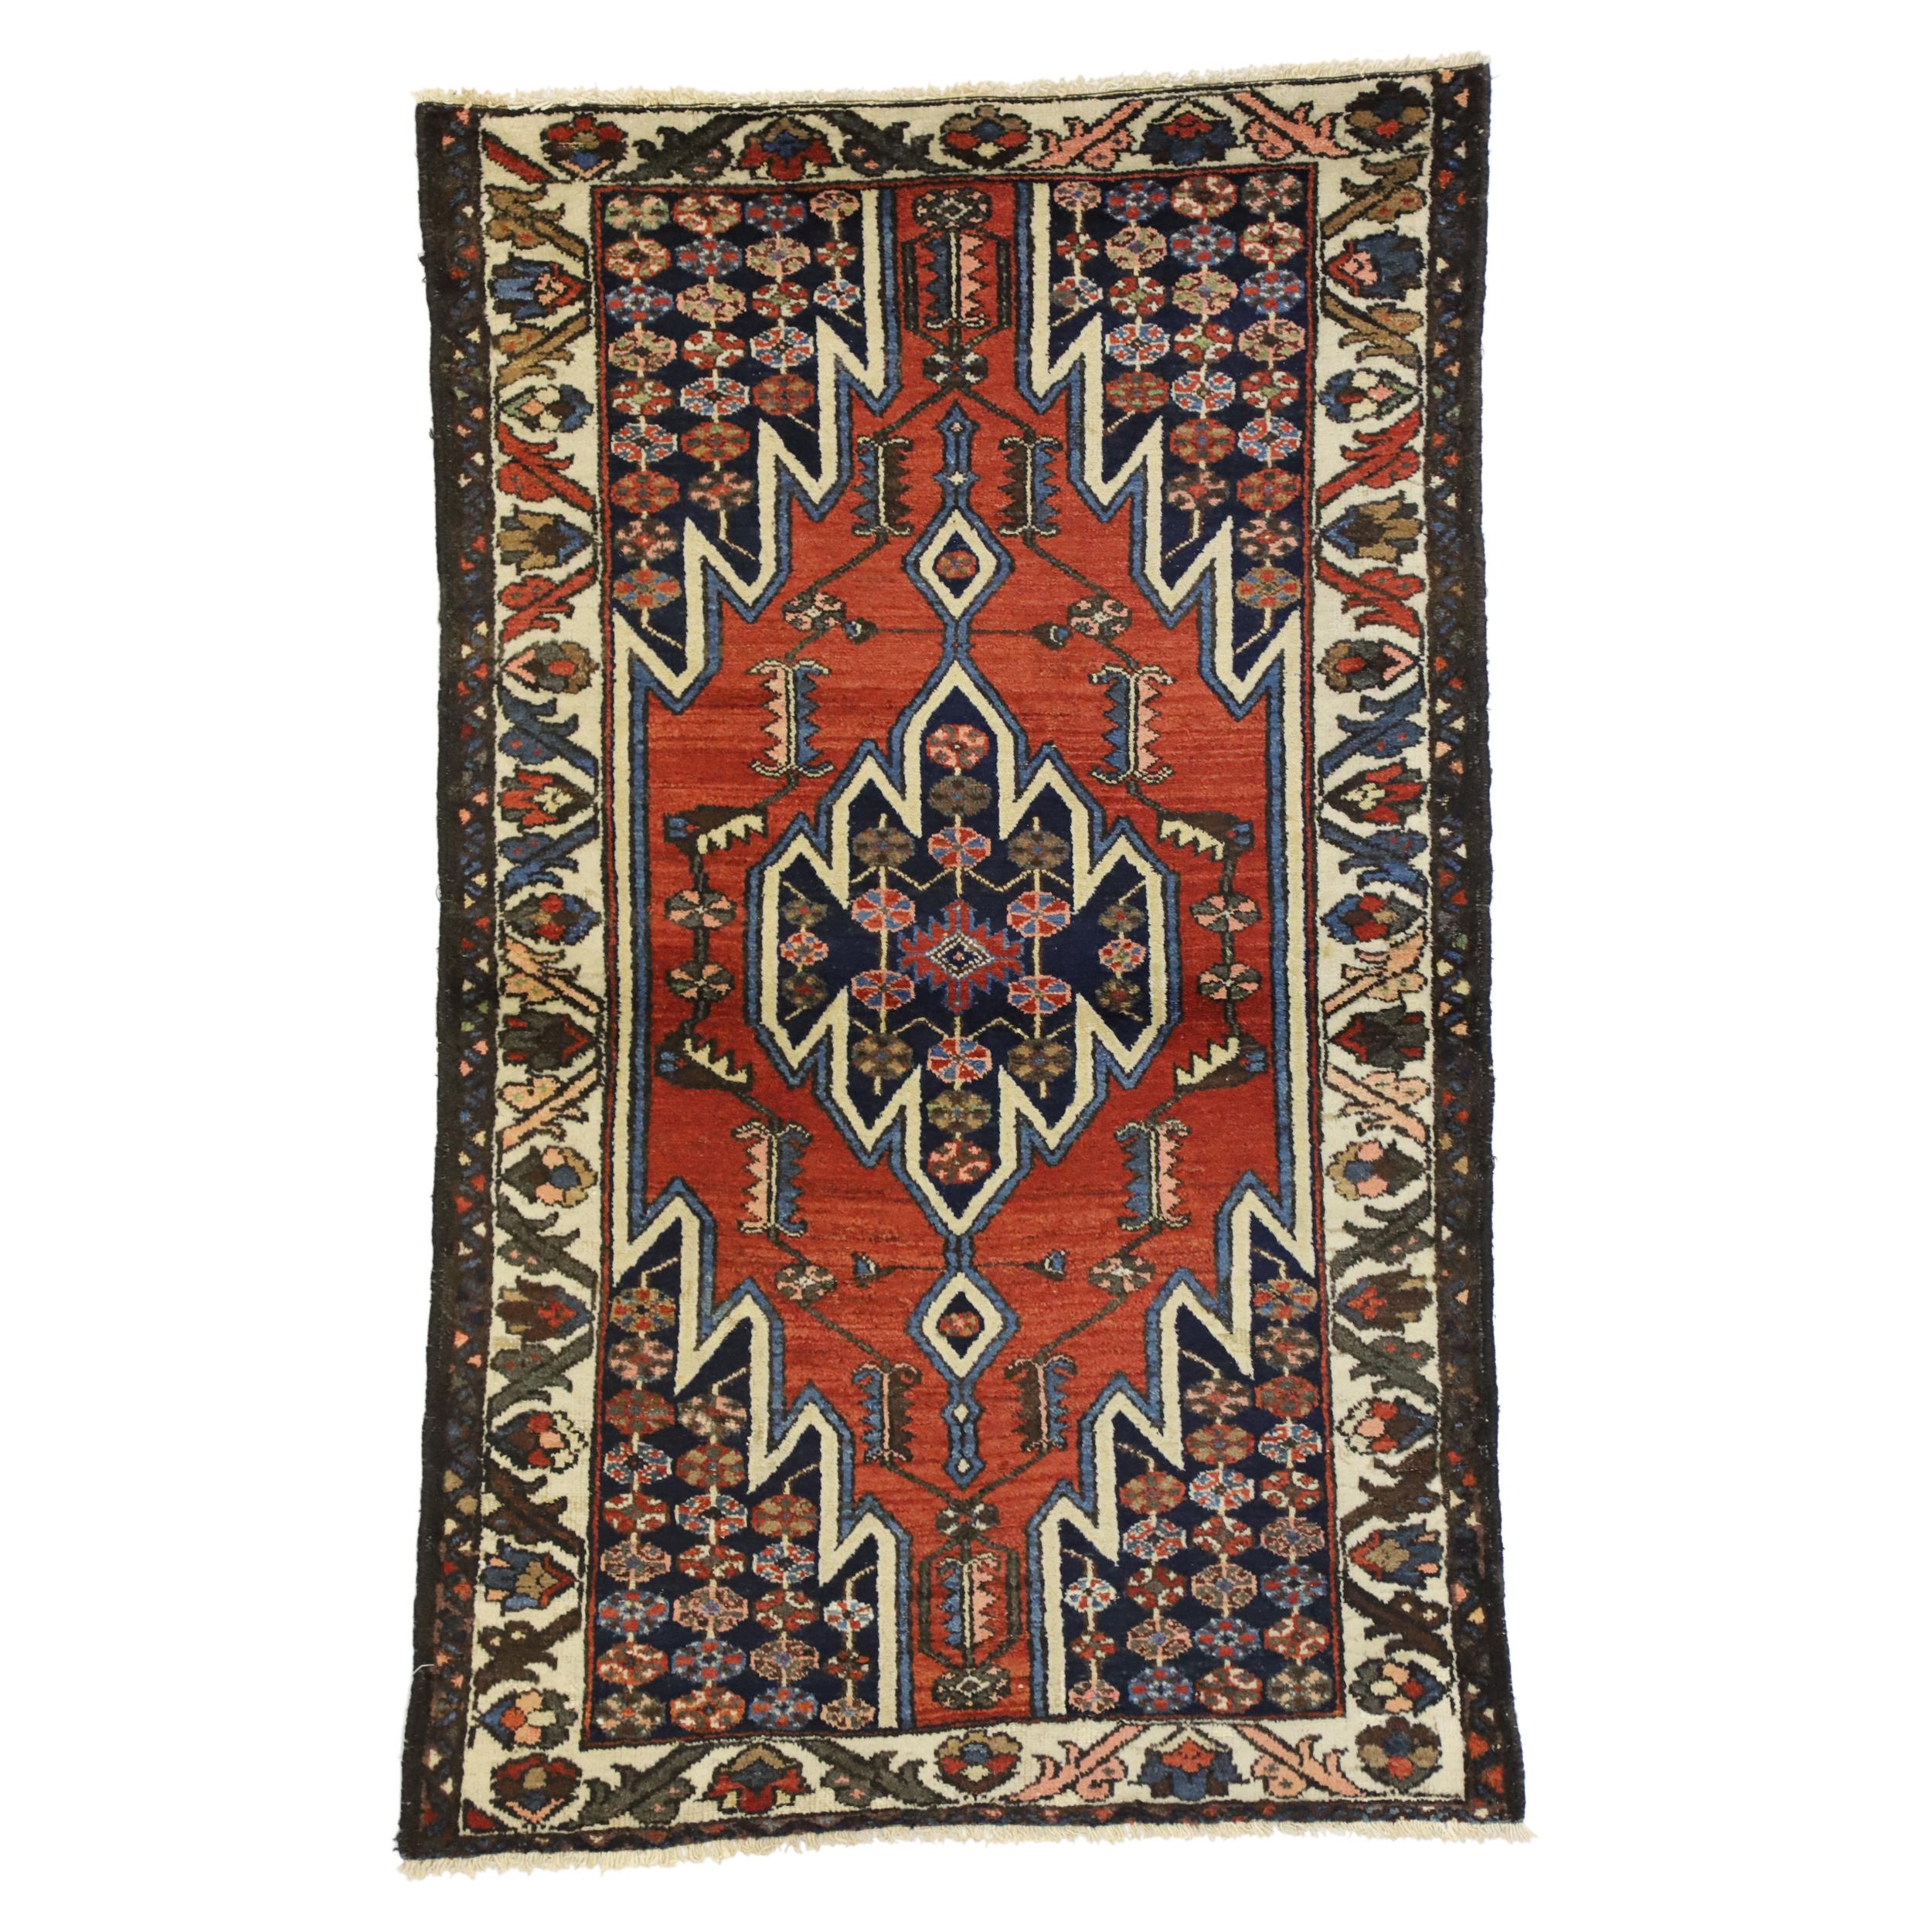 Antique Persian Mazlaghan Hamadan Rug with Modern Tribal Style